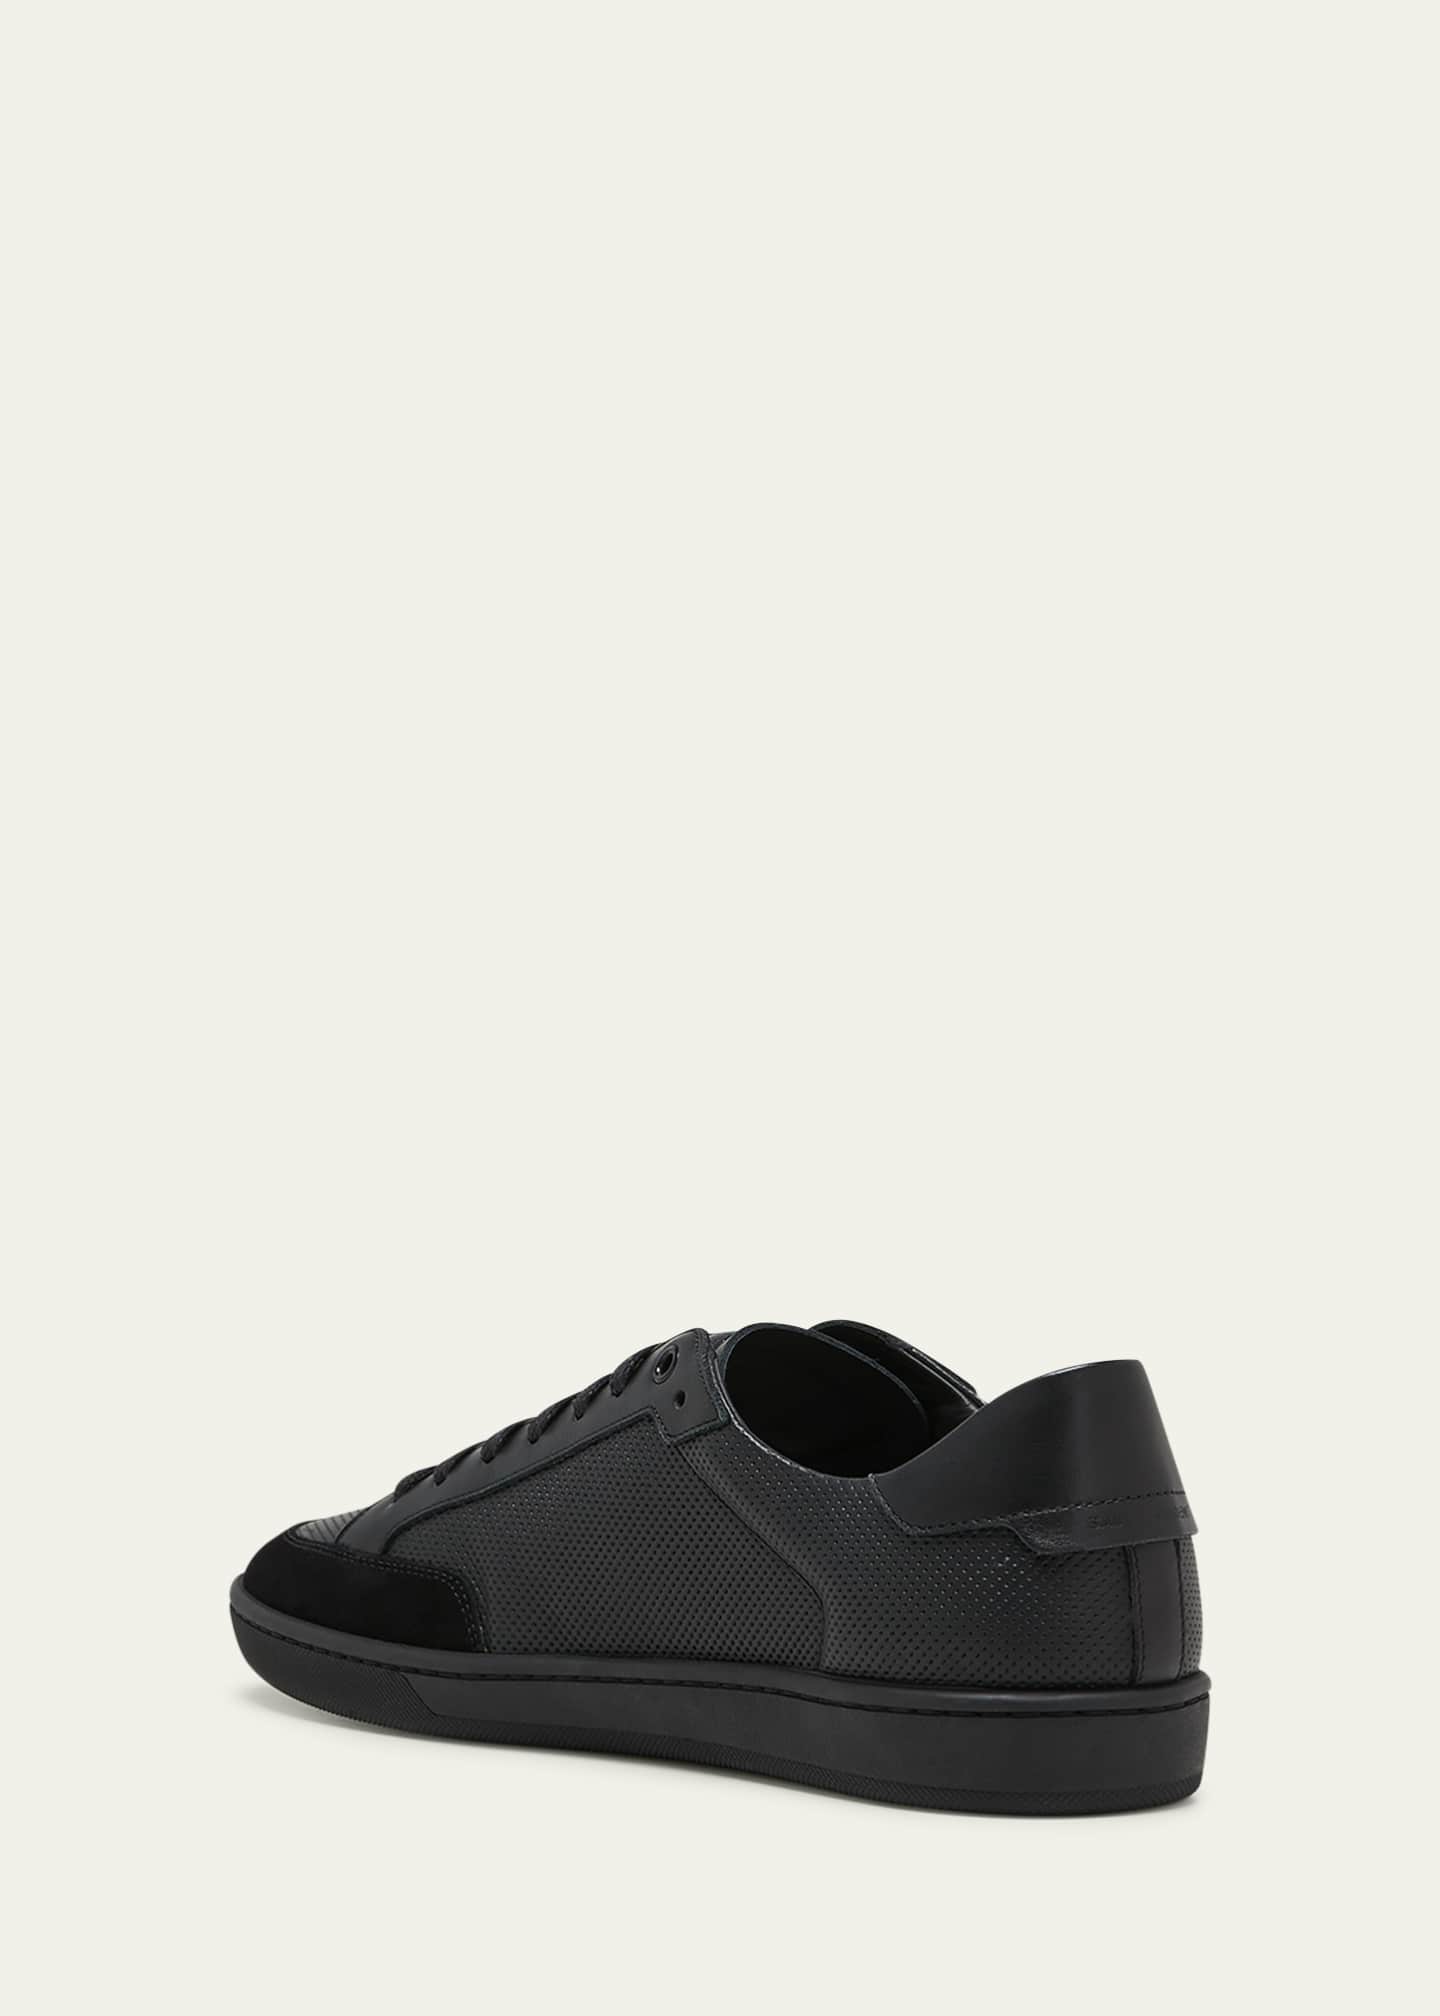 Saint Laurent Men's SL/10 Court Classic Perforated Leather Sneakers Image 4 of 5